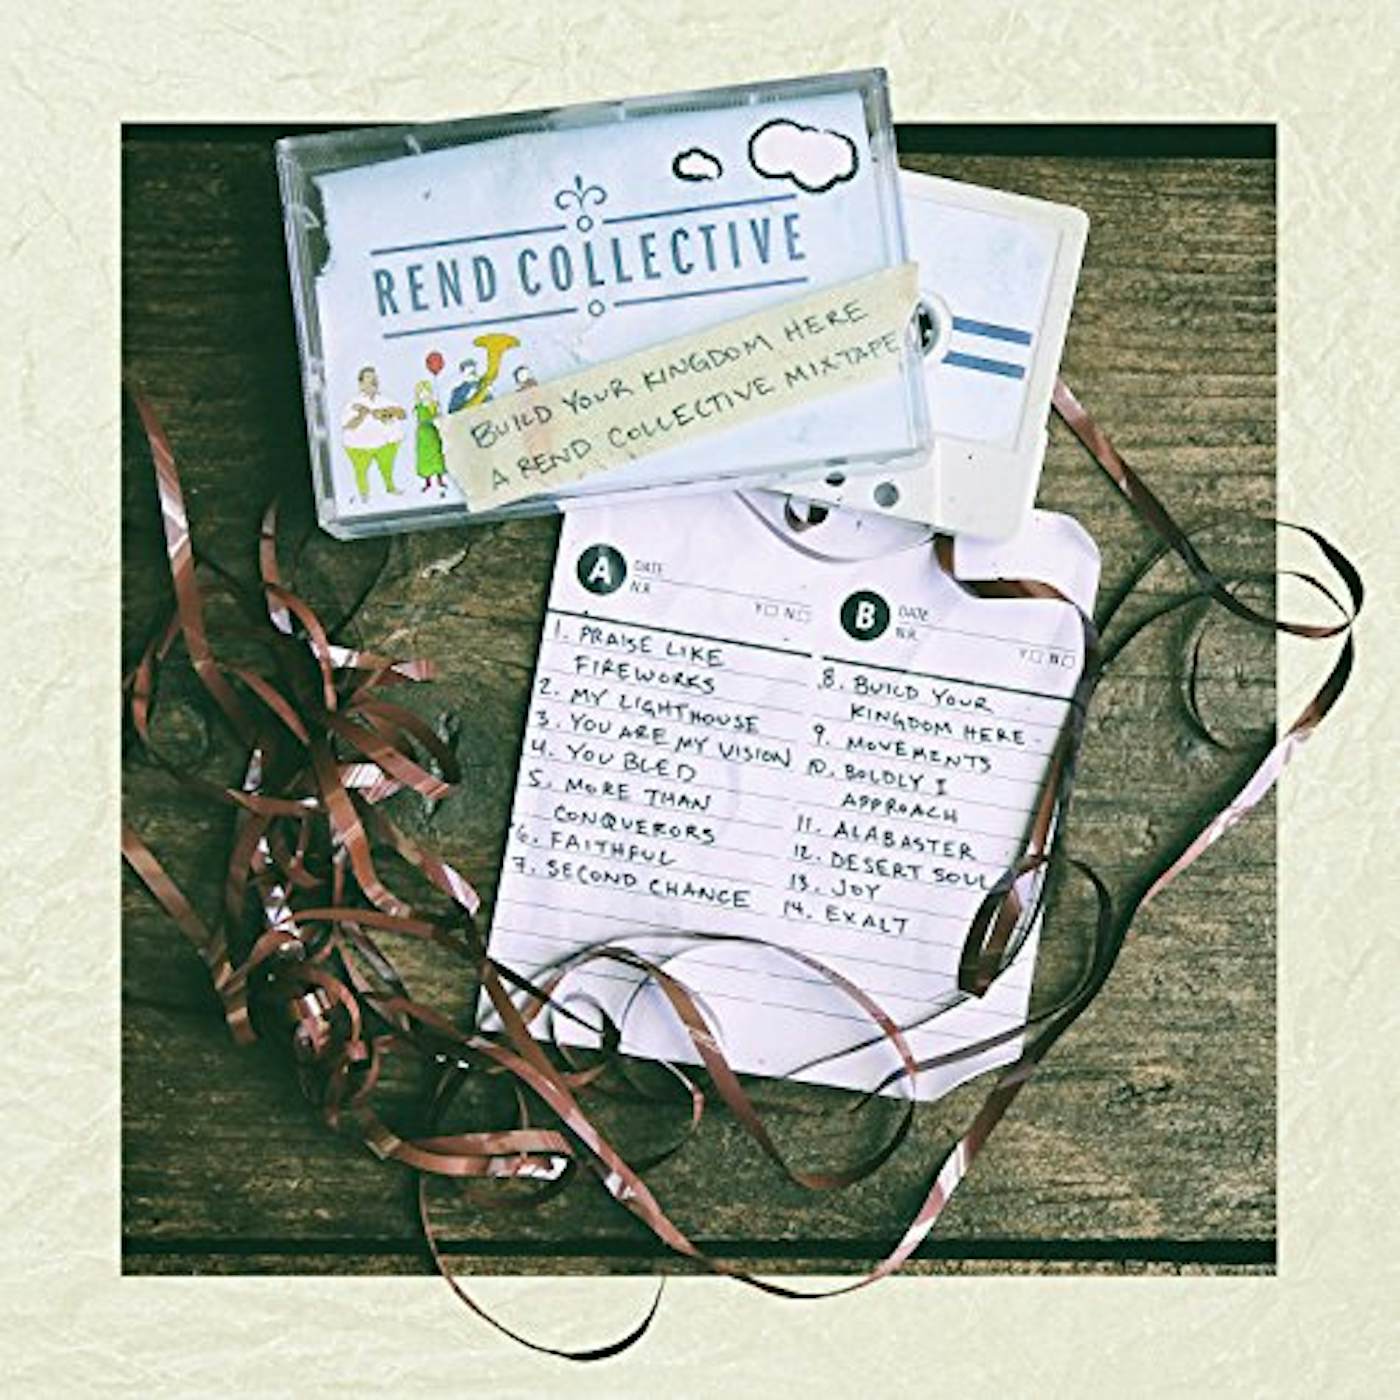 BUILD YOUR KINGDOM HERE: REND COLLECTIVE MIX TAPE CD